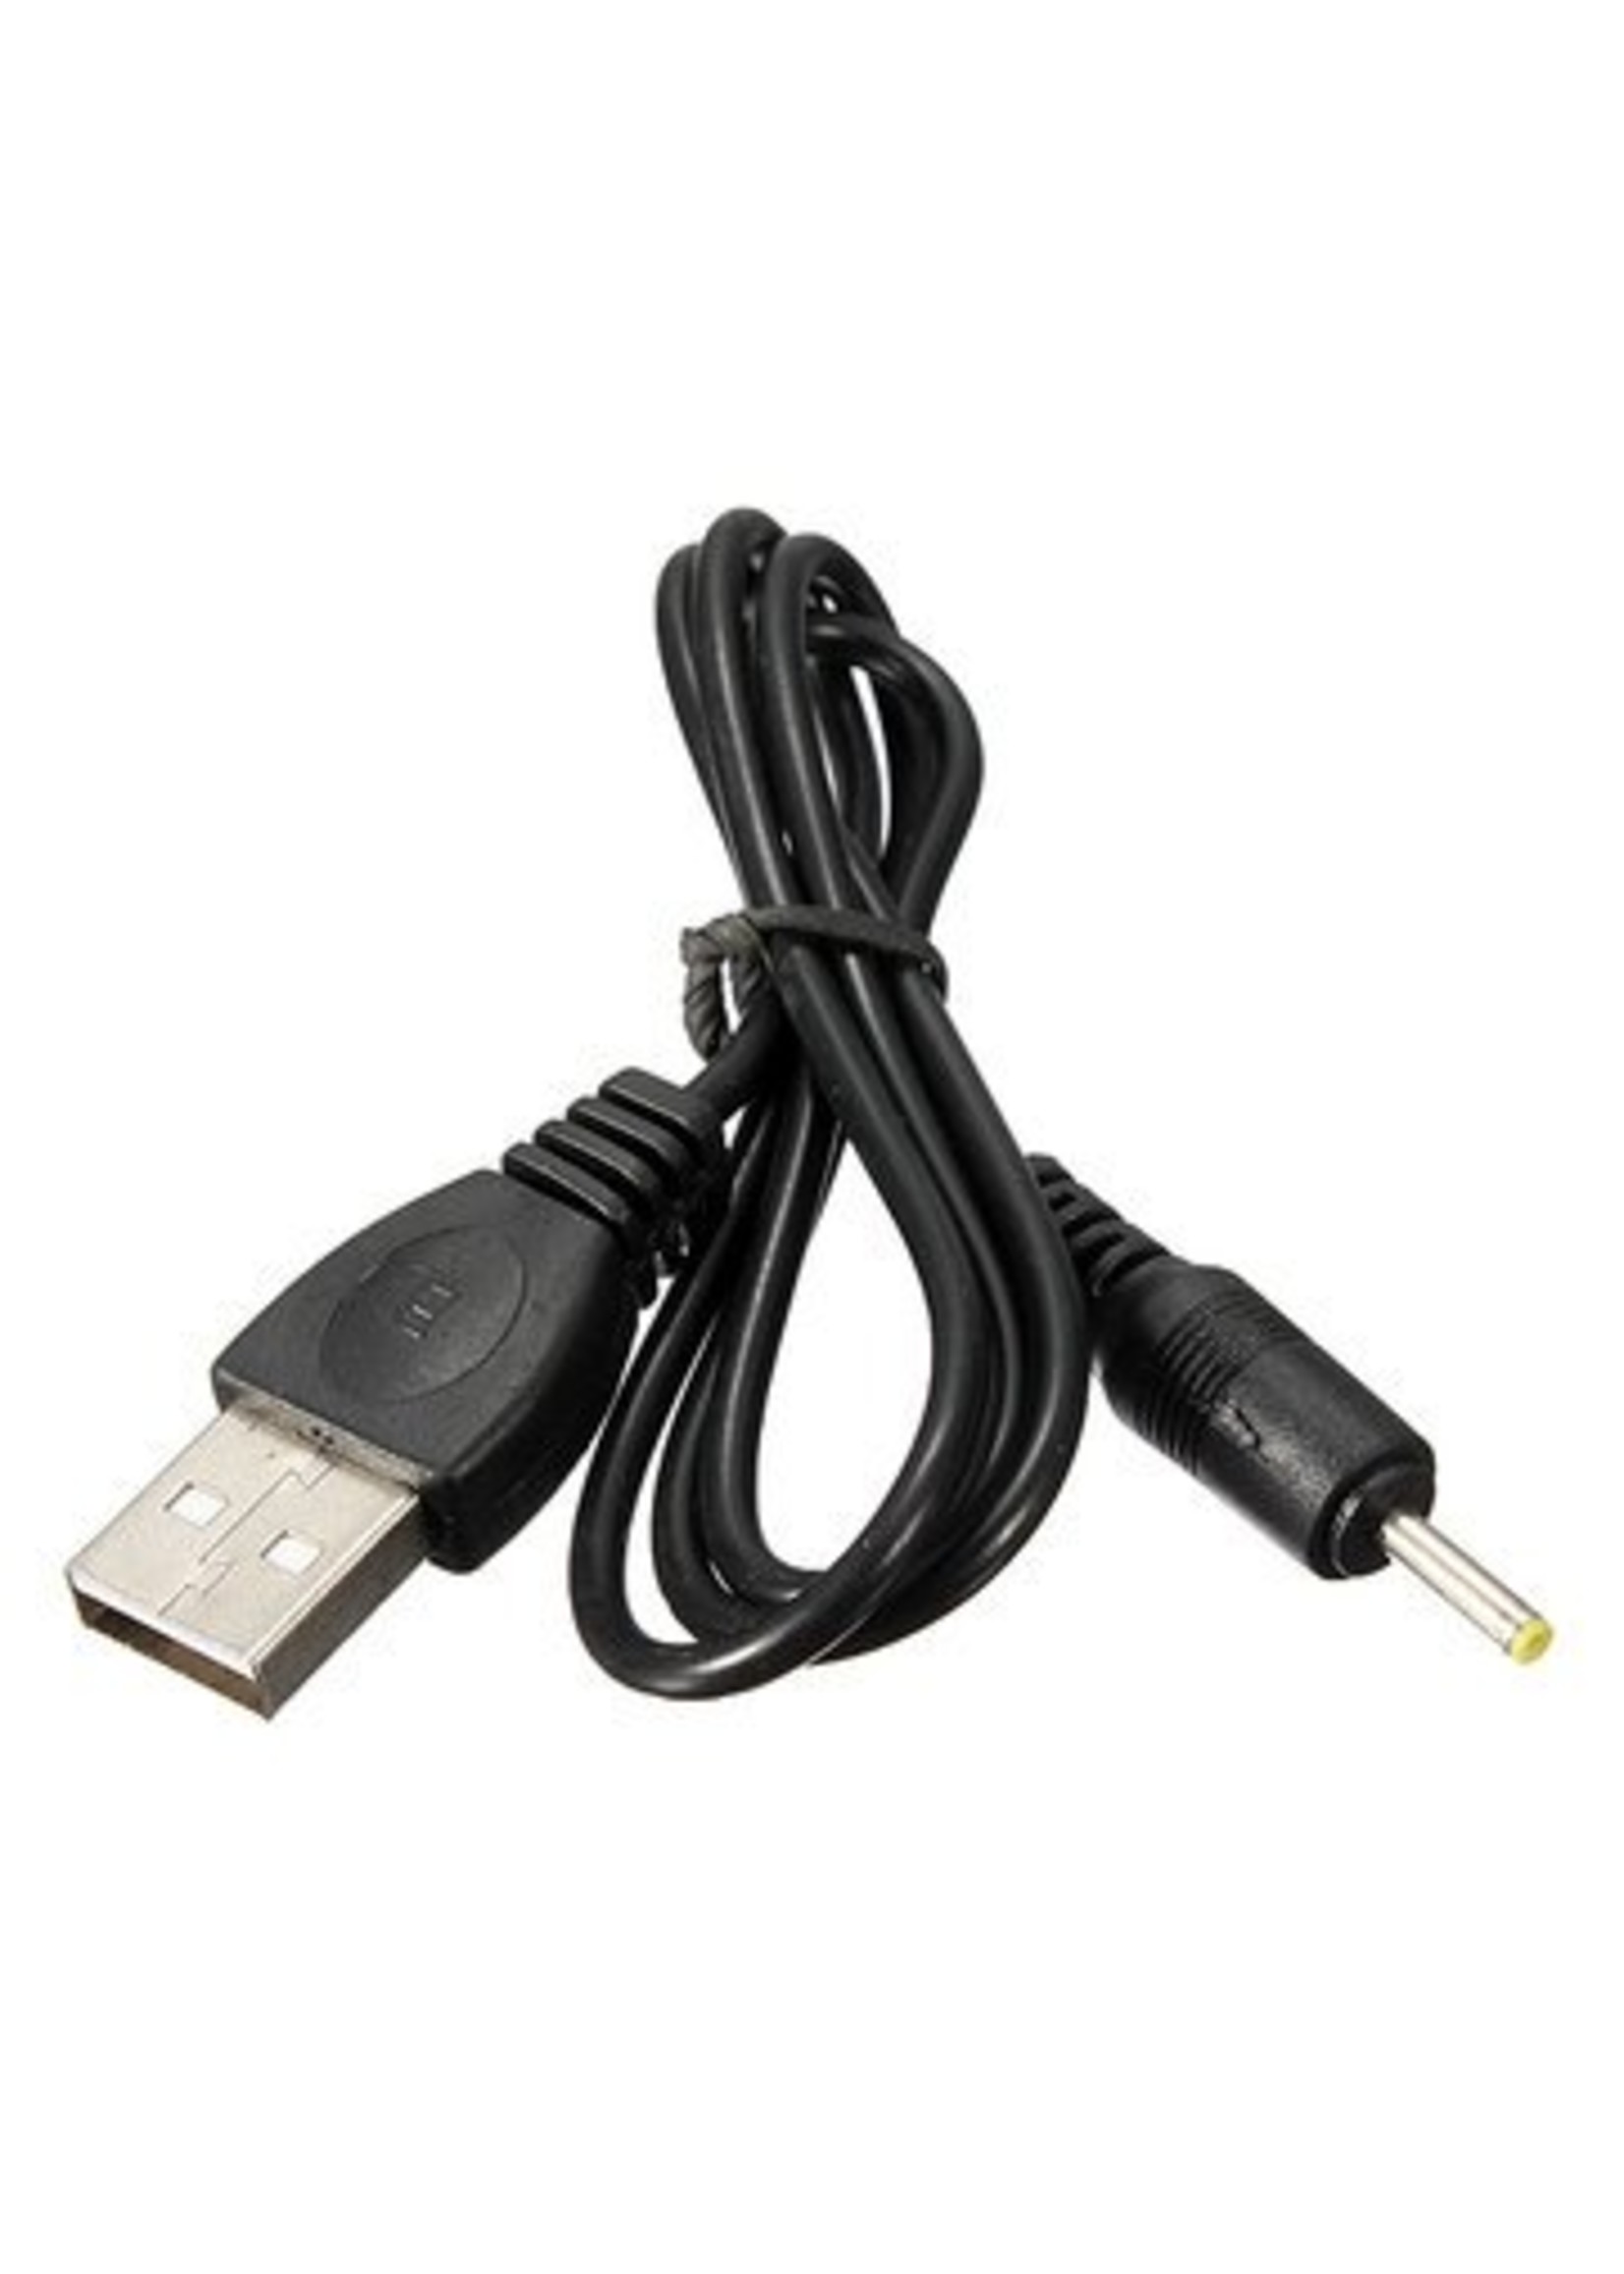 Cable-Fine Pin USB Charge 5V